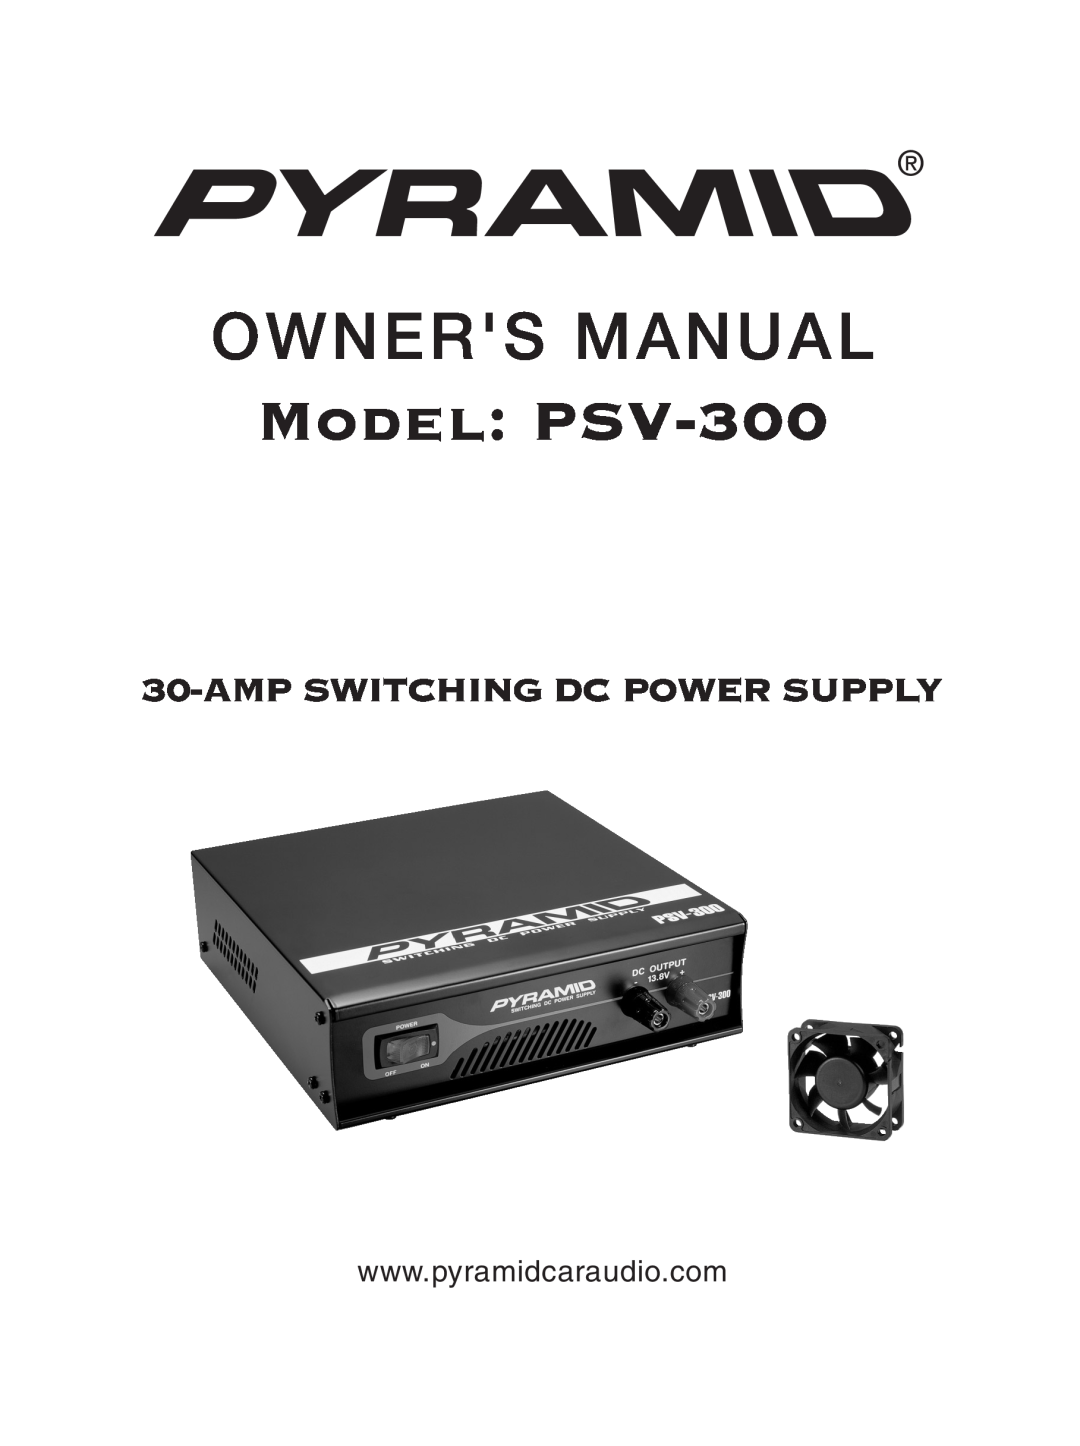 Pyramid Car Audio owner manual Model PSV-300, Owners Manual, Amp Switching Dc Power Supply 